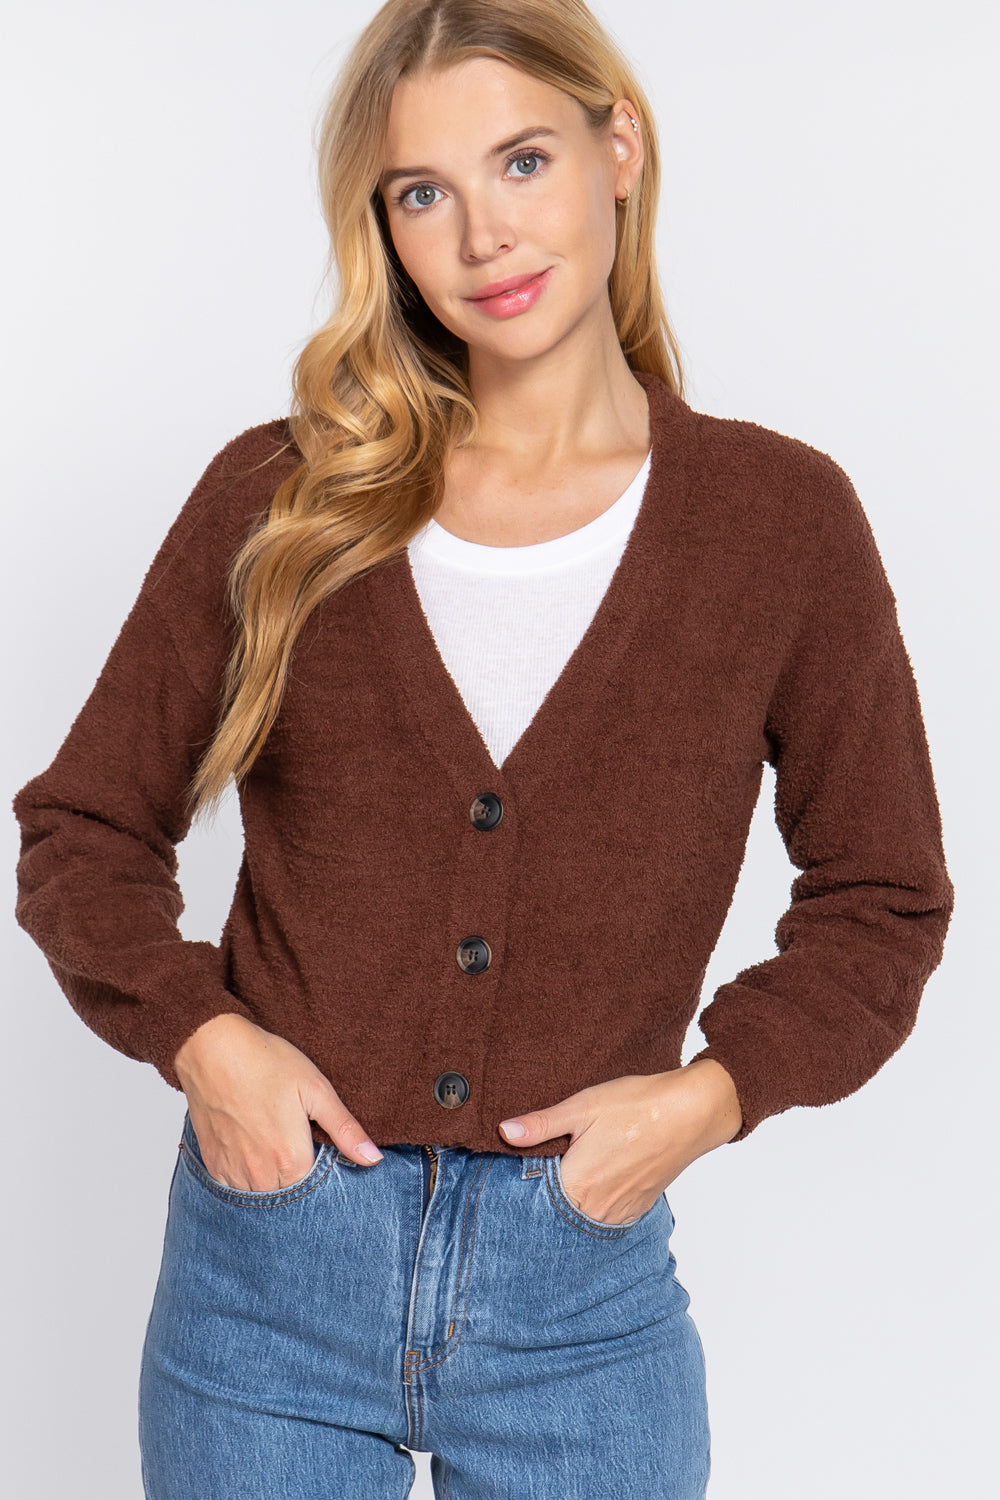 Brown - Long Slv V-neck Sweater Cardigan - 2 colors - womens sweater at TFC&H Co.